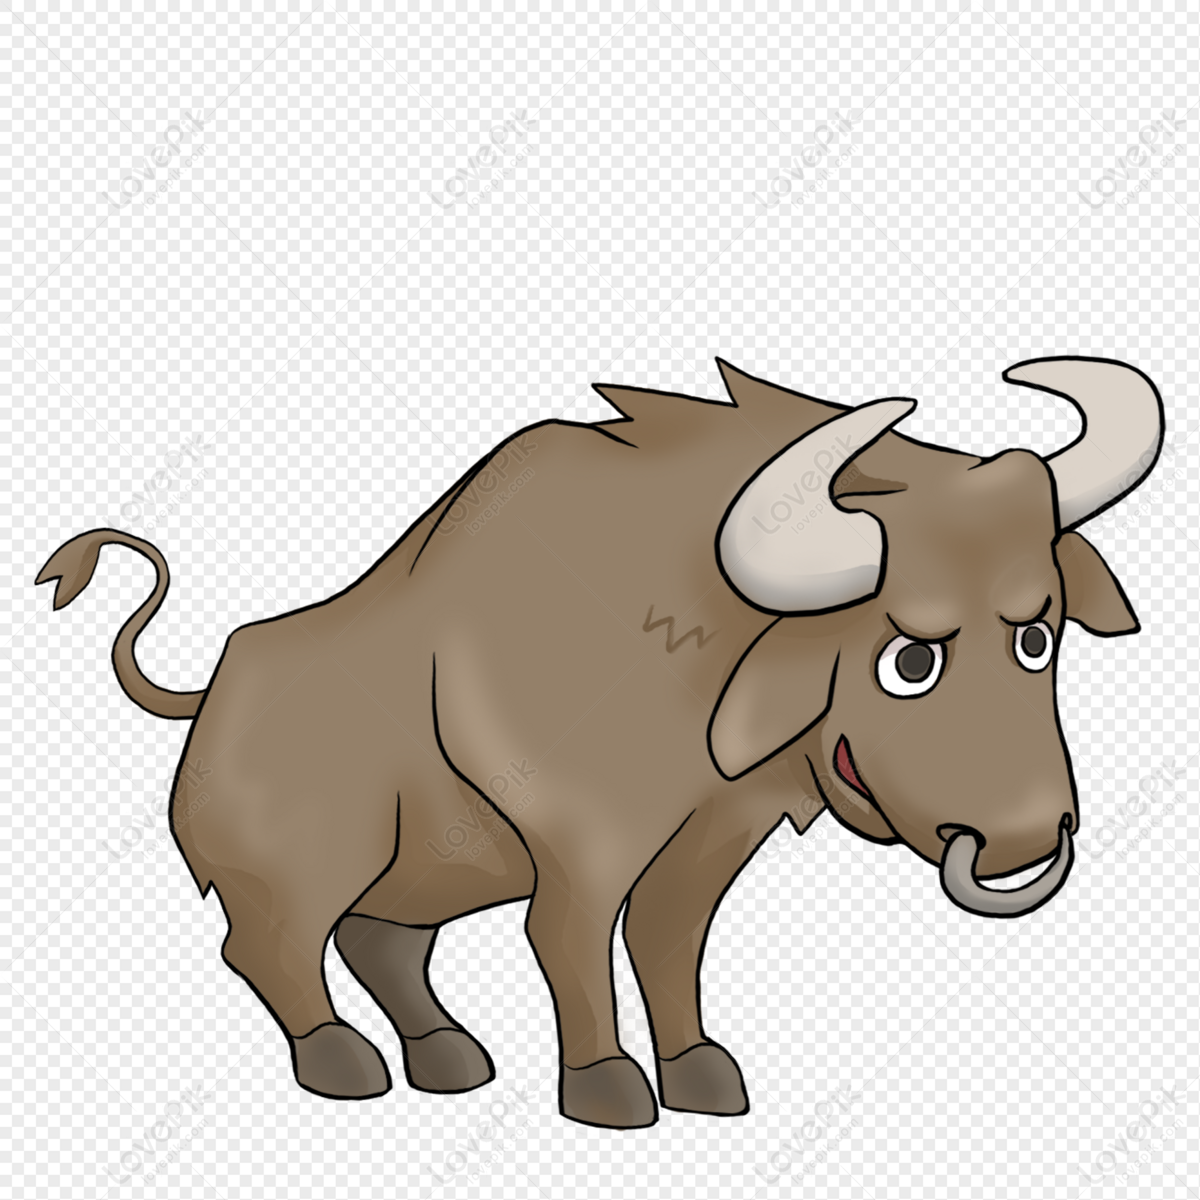 Cartoon Bull PNG Image Free Download And Clipart Image For Free Download -  Lovepik | 401480421